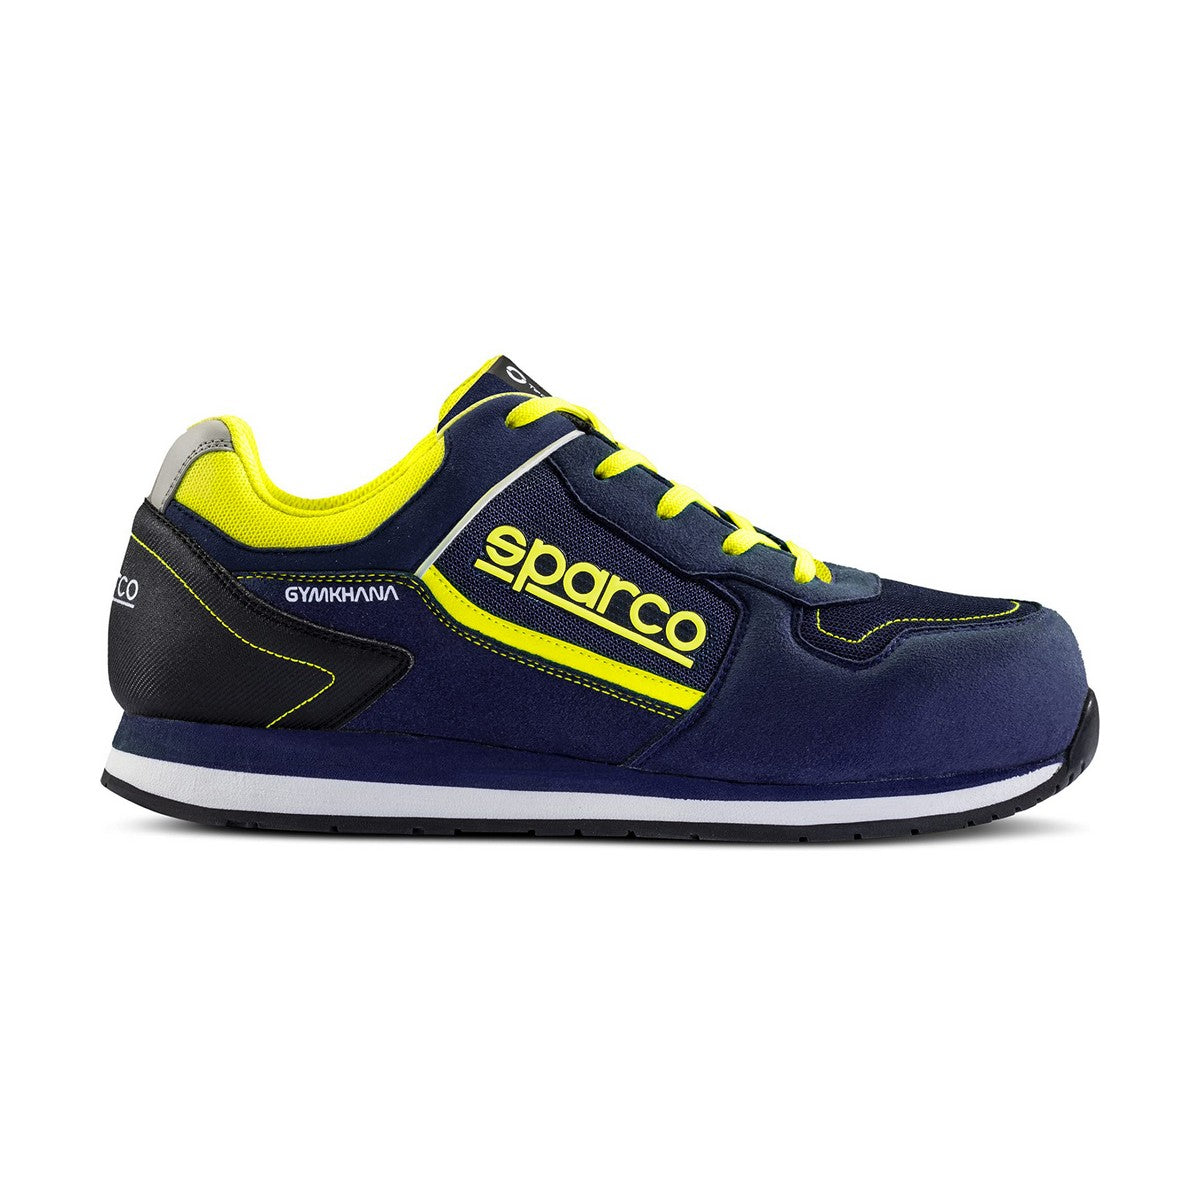 Turnschuhe Sparco 0752738